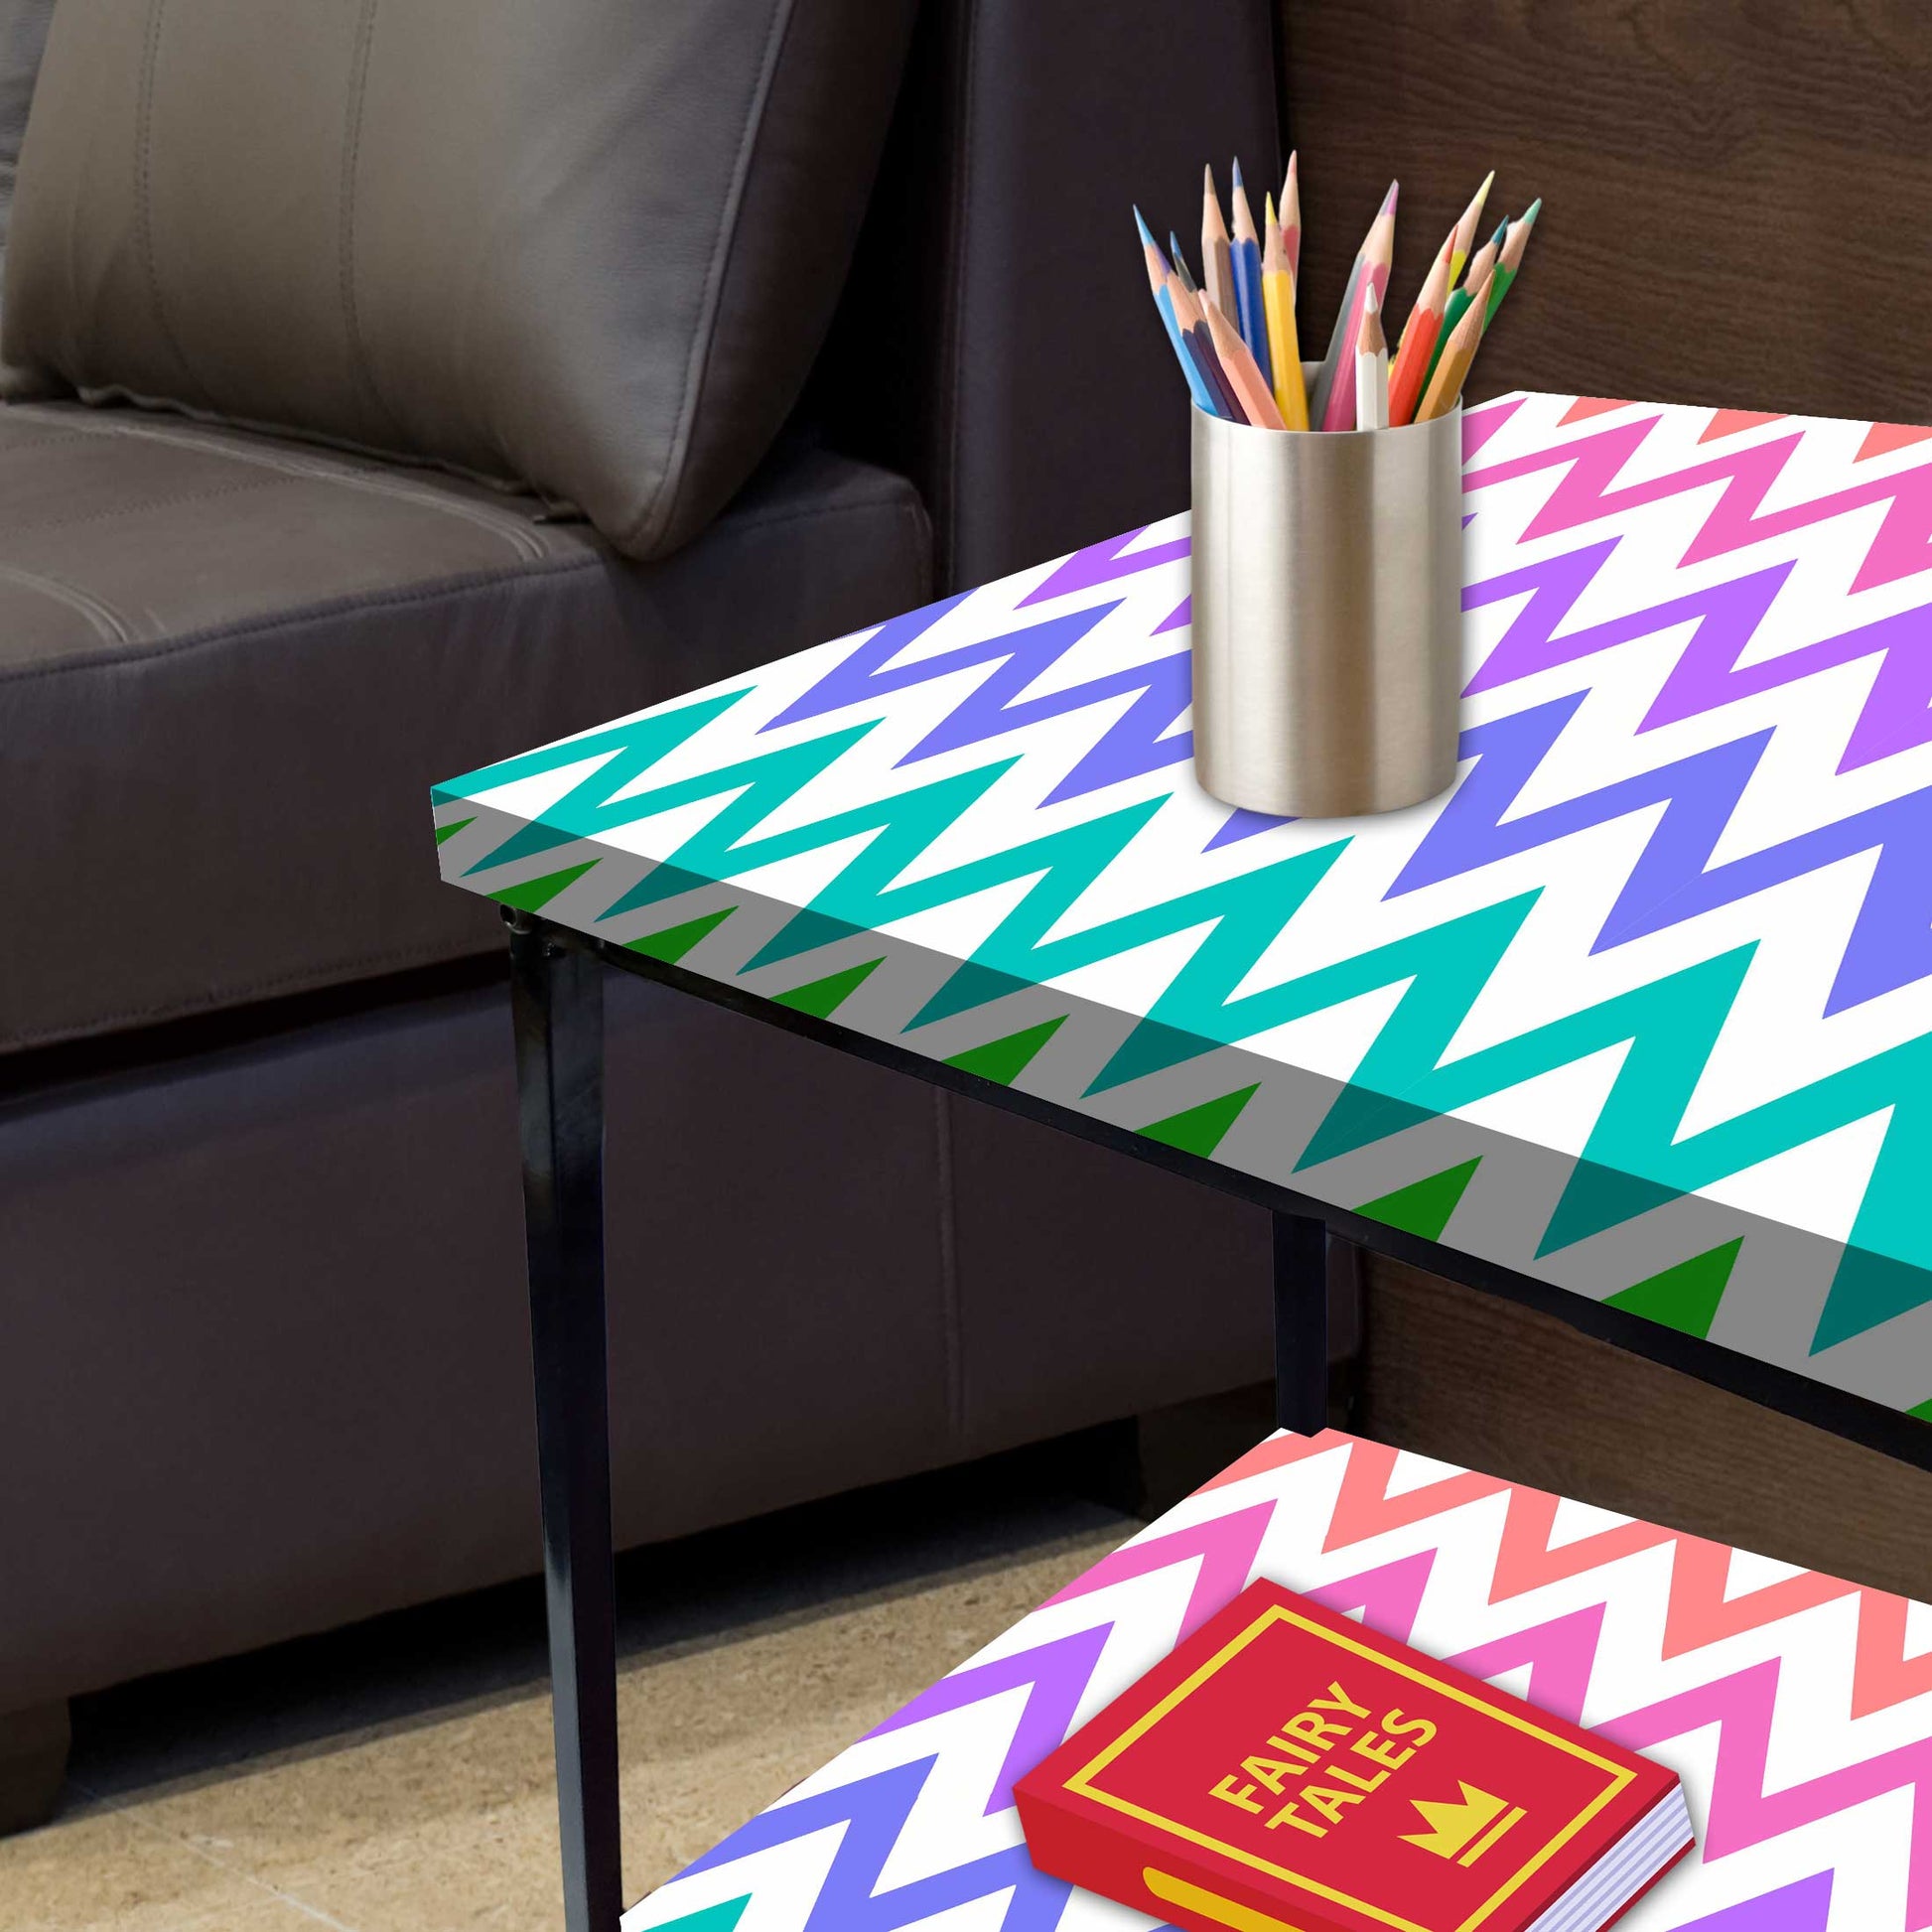 Modern Side Tables for Bedroom with Storage - Colorful pattern Nutcase